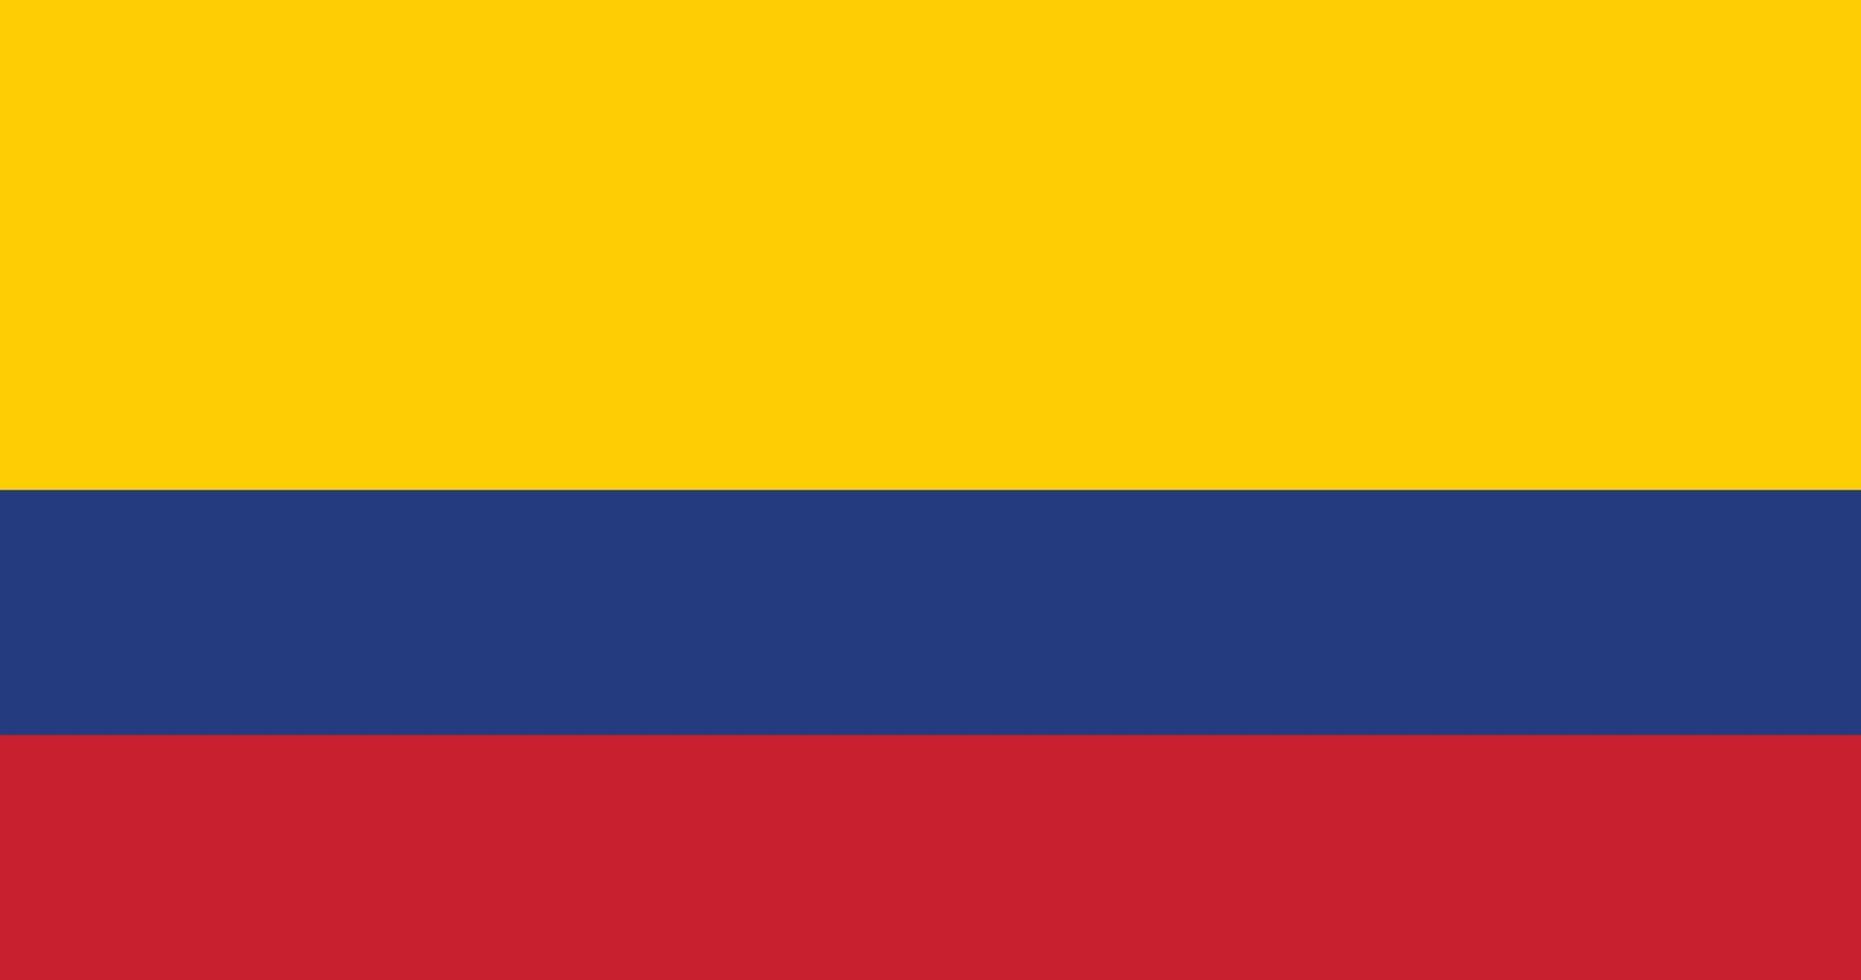 Colombia flag with original RGB color vector illustration design